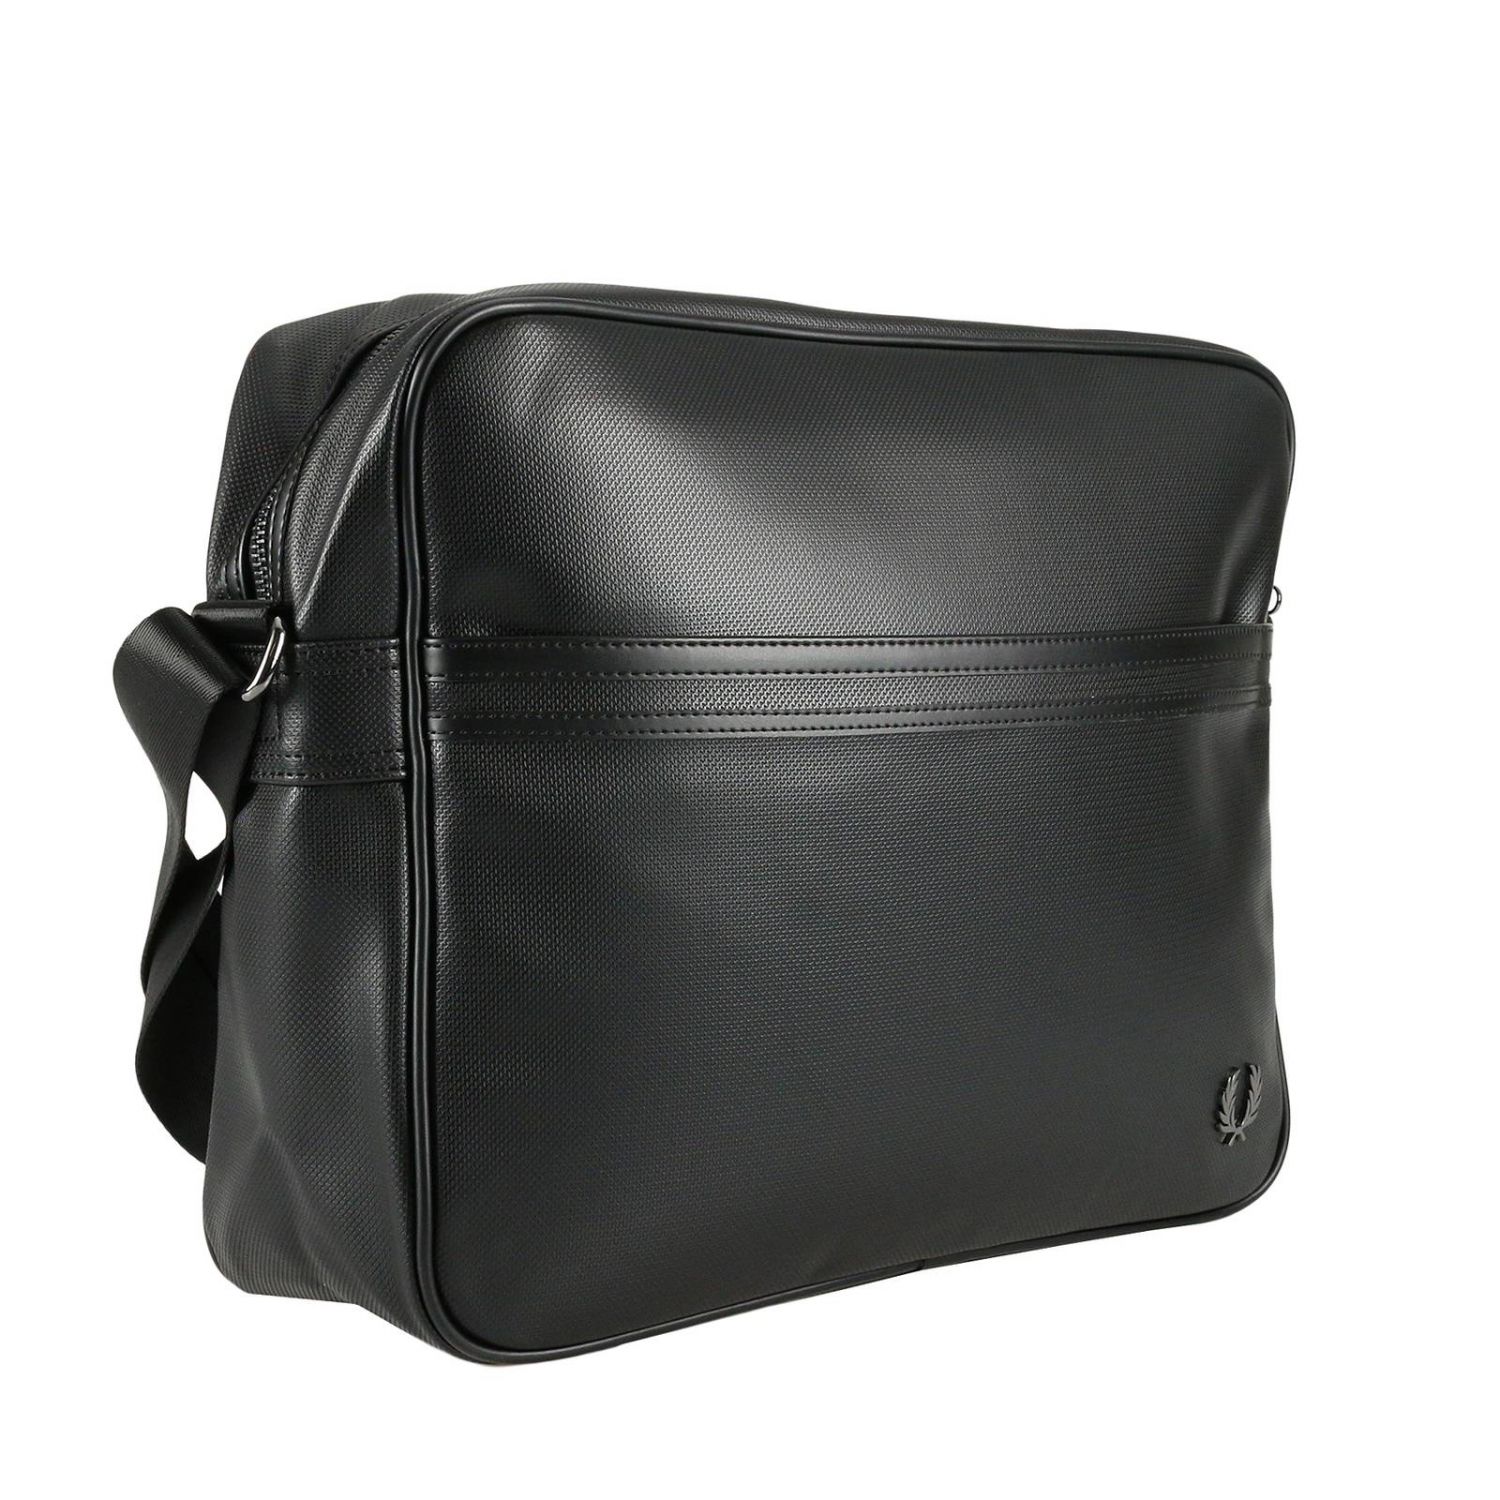 Fred Perry Outlet: Bags men | Bags Fred Perry Men Black | Bags Fred ...